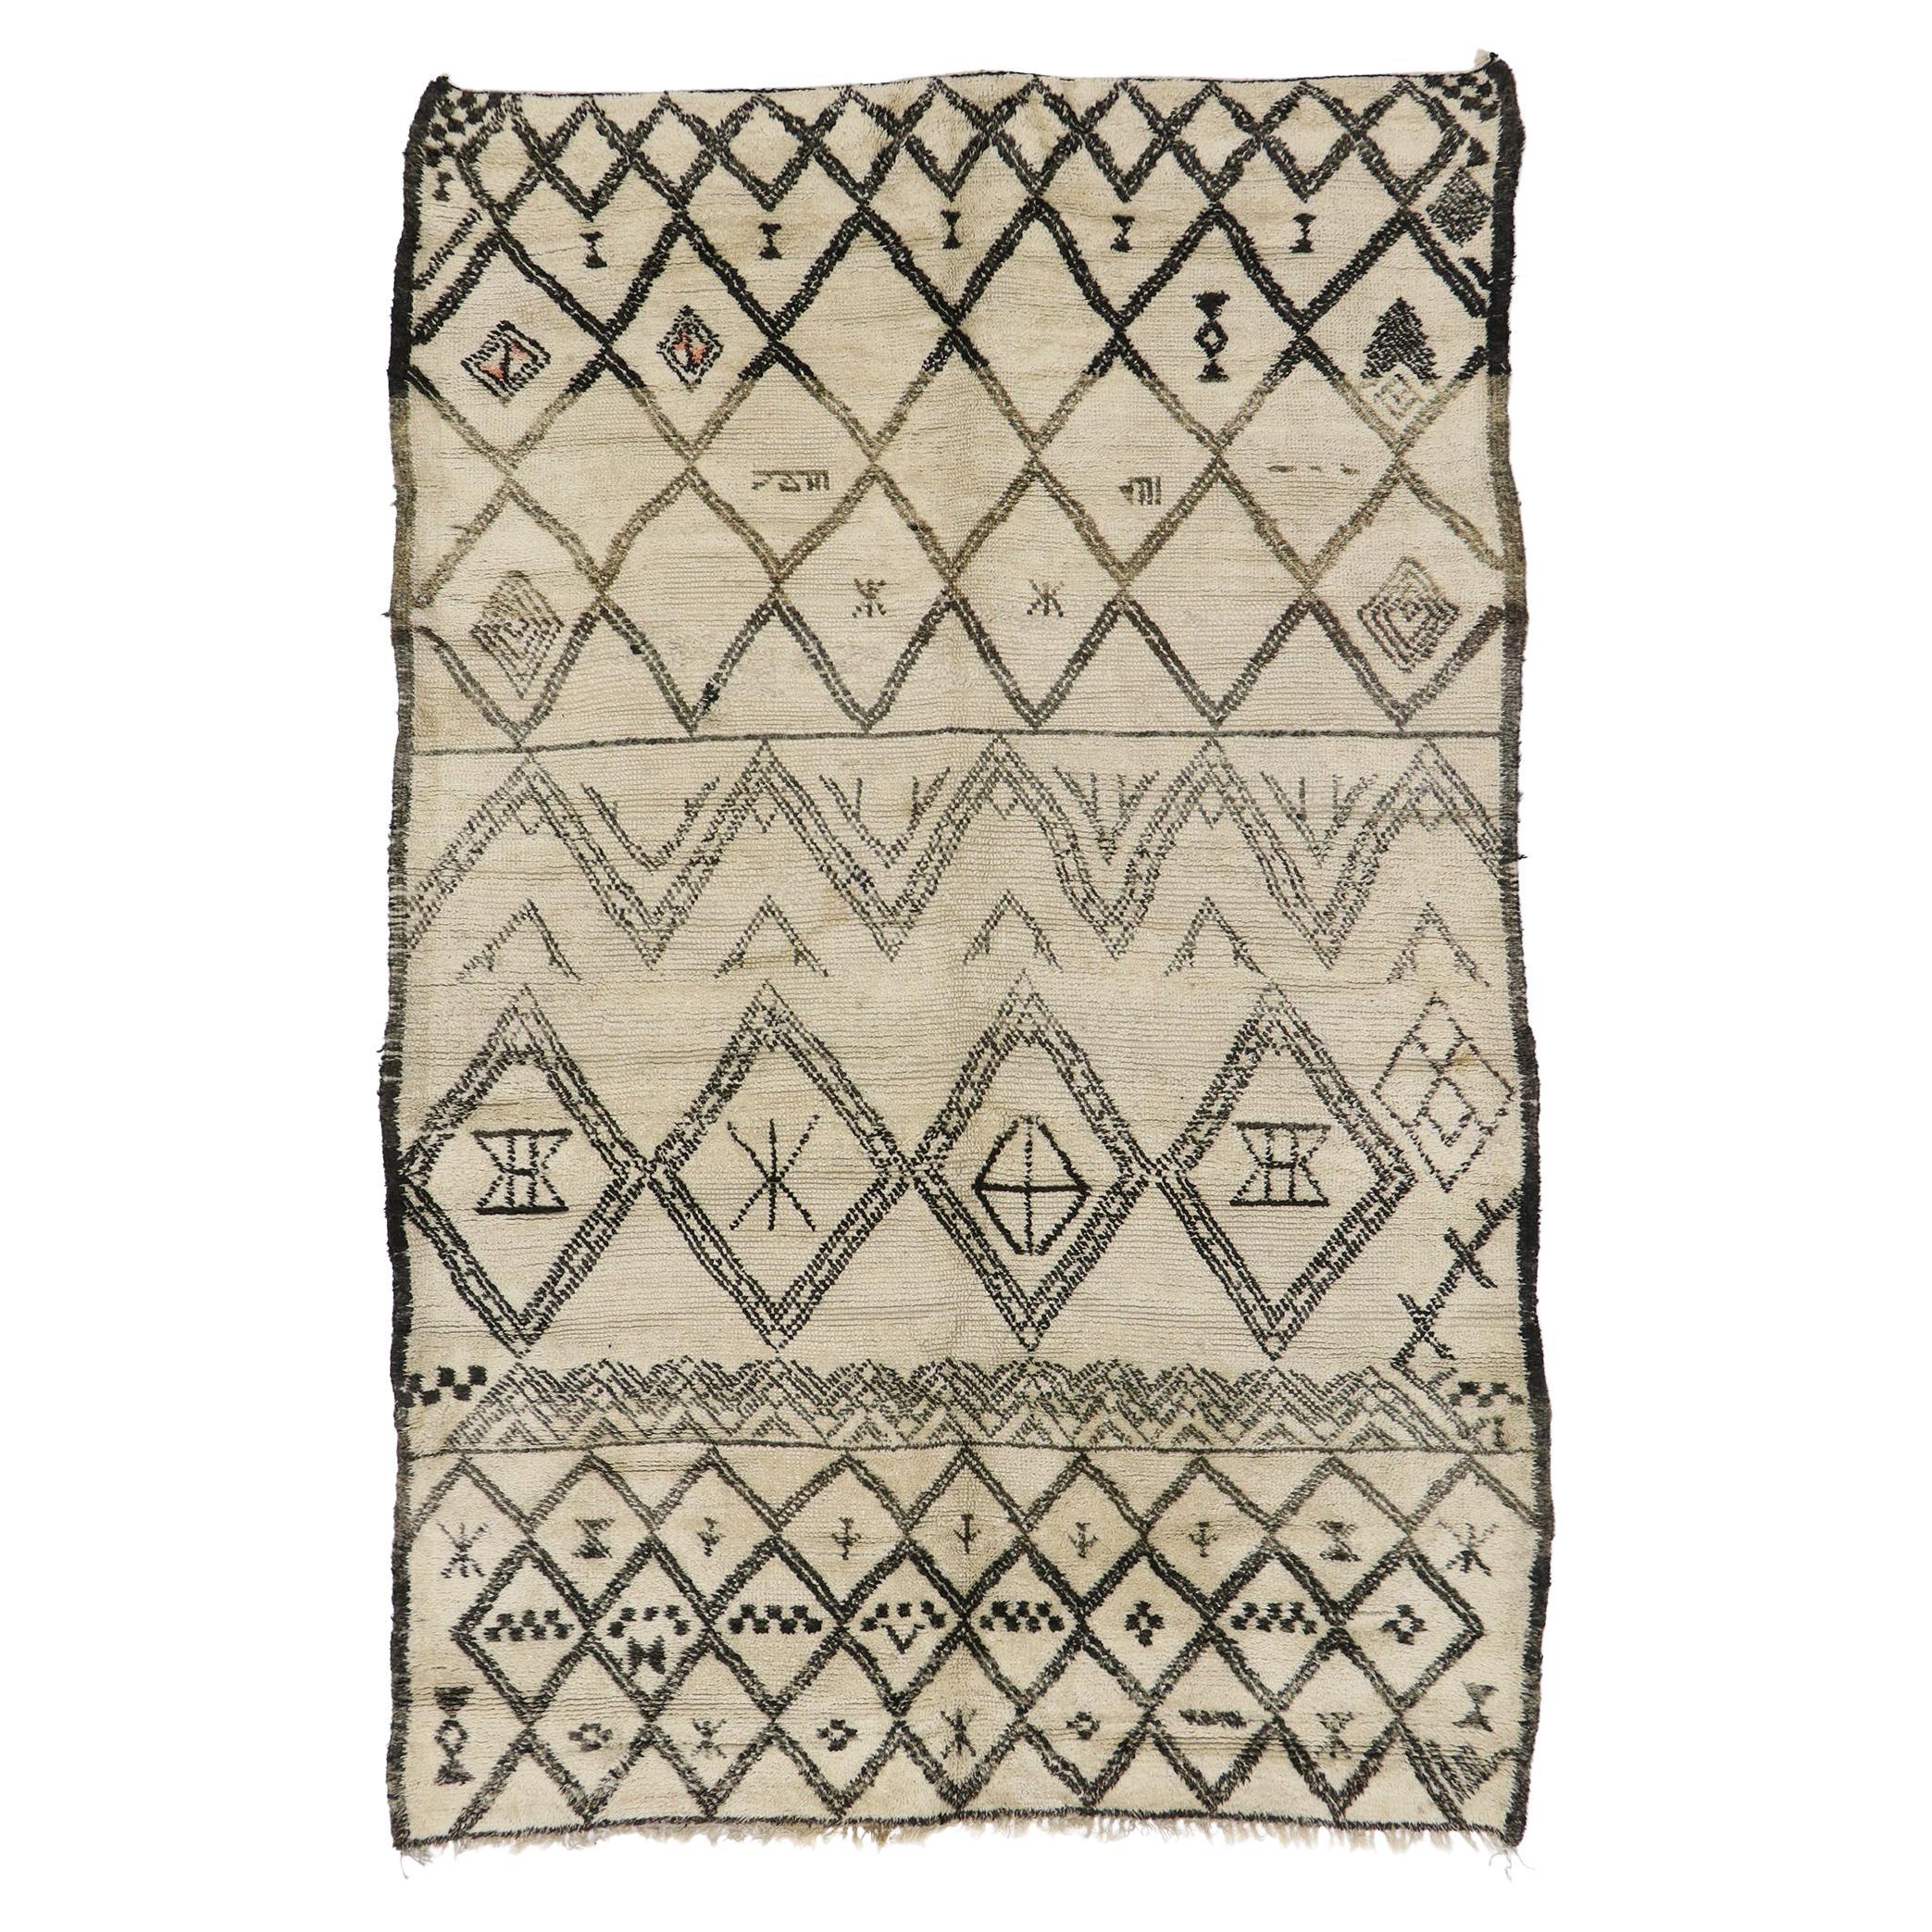 Vintage Beni Ourain Moroccan Rug, Nomadic Charm Meets Midcentury Modern Style For Sale